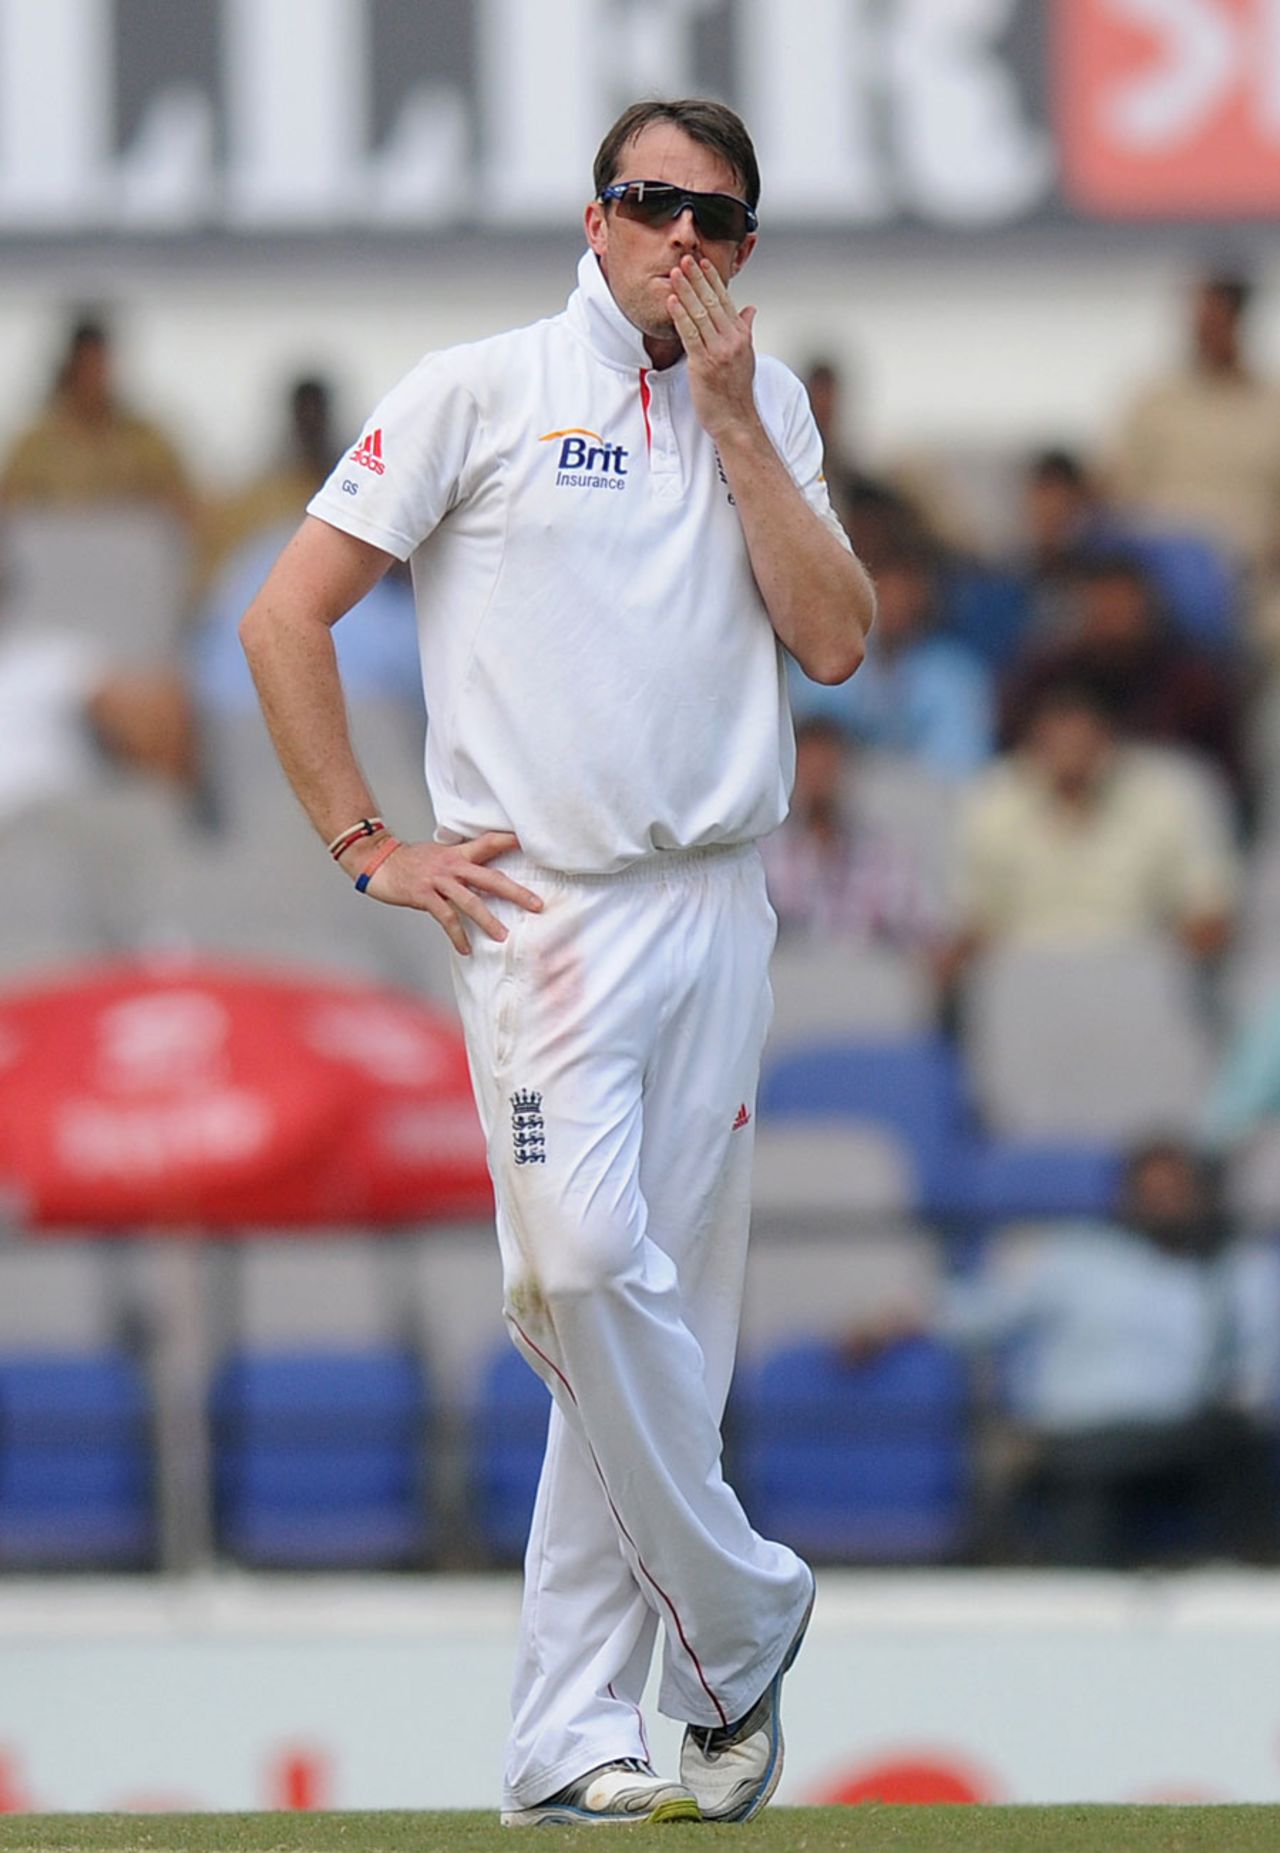 England's bowlers toiled for two sessions without a wicket, India v England, 4th Test, Nagpur, 3rd day, December 15, 2012